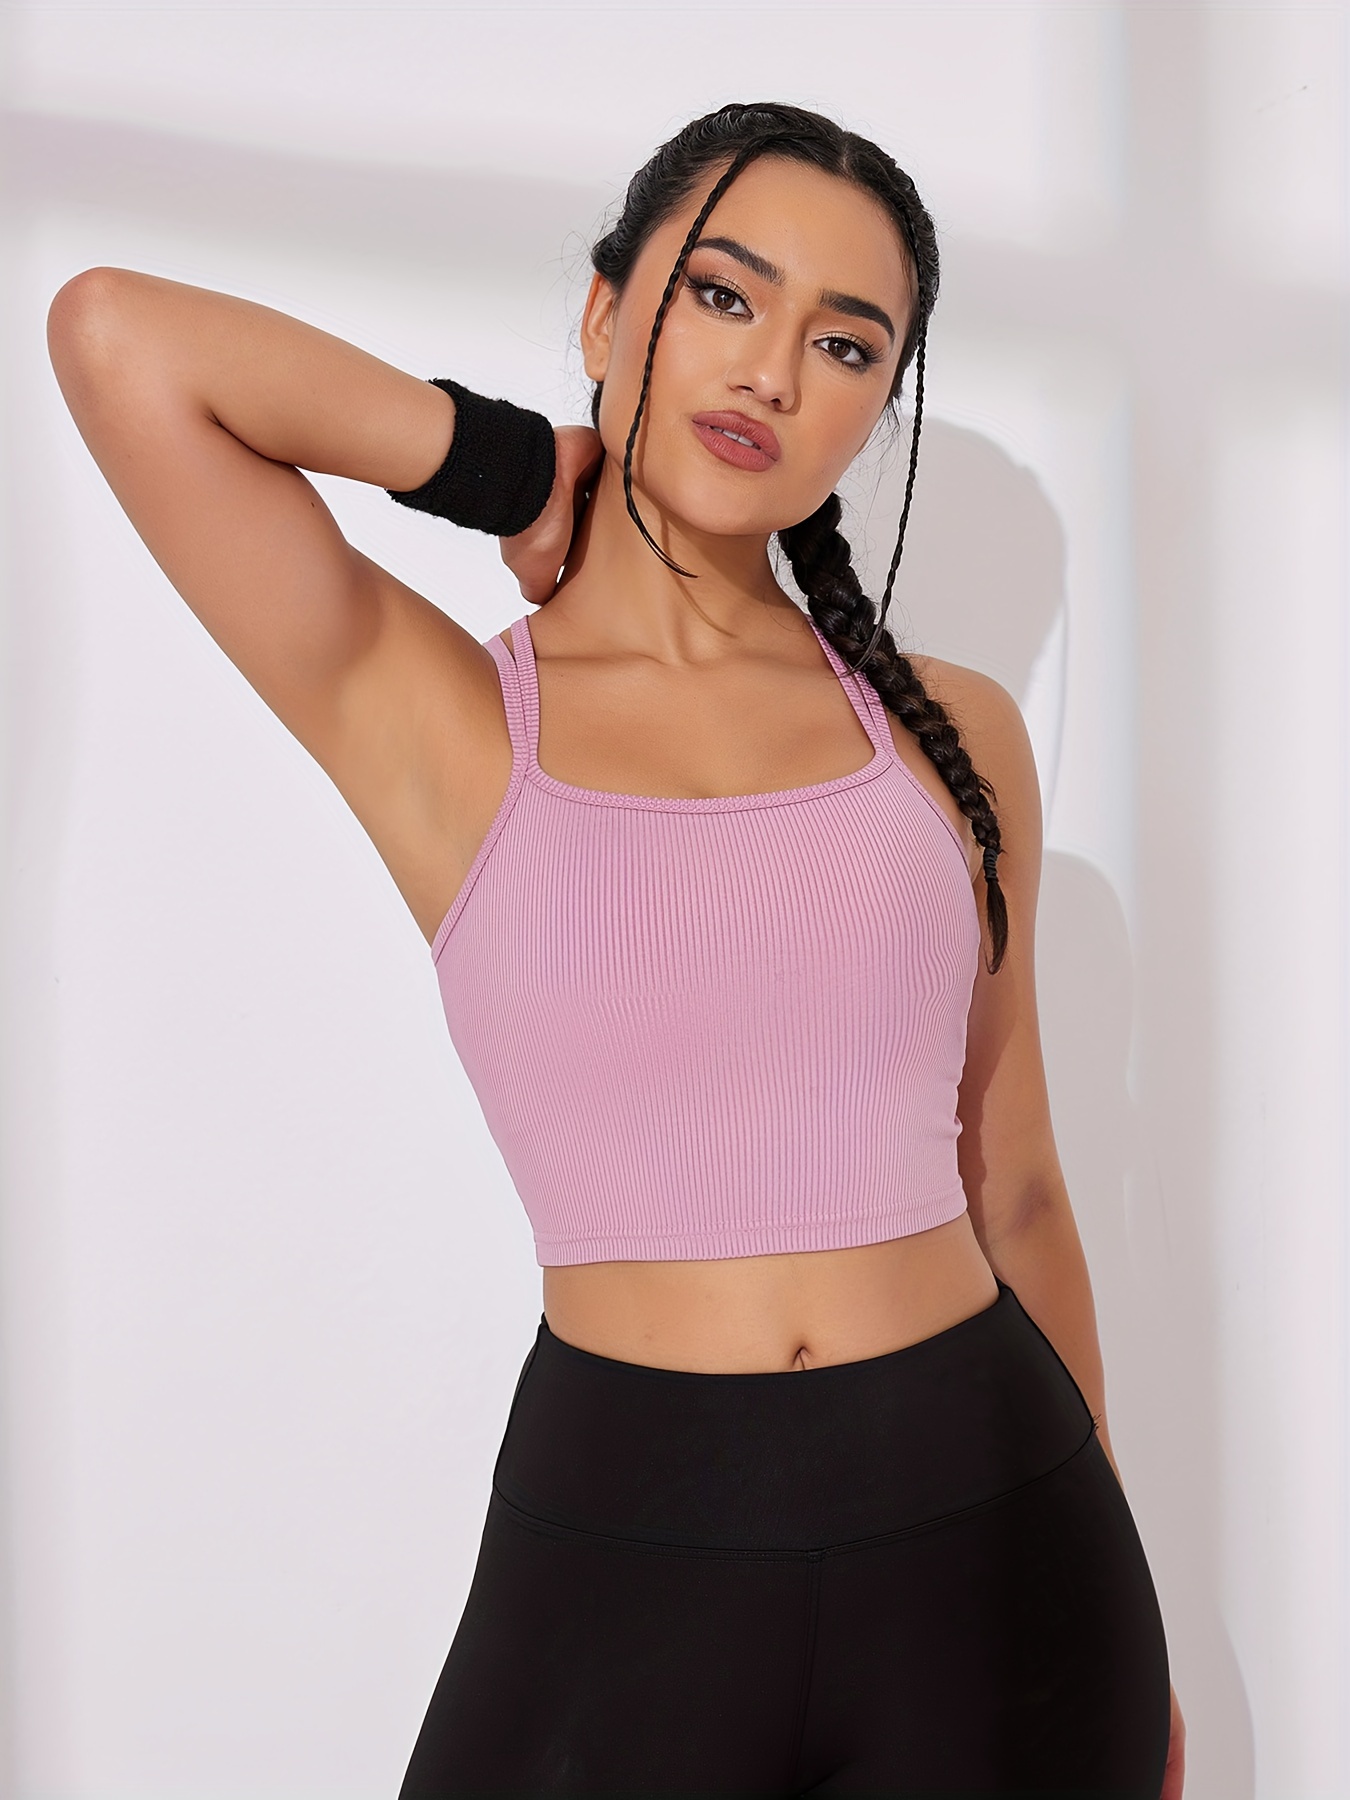 Padded Strappy Sports Bras for Women - Activewear Tops for Yoga